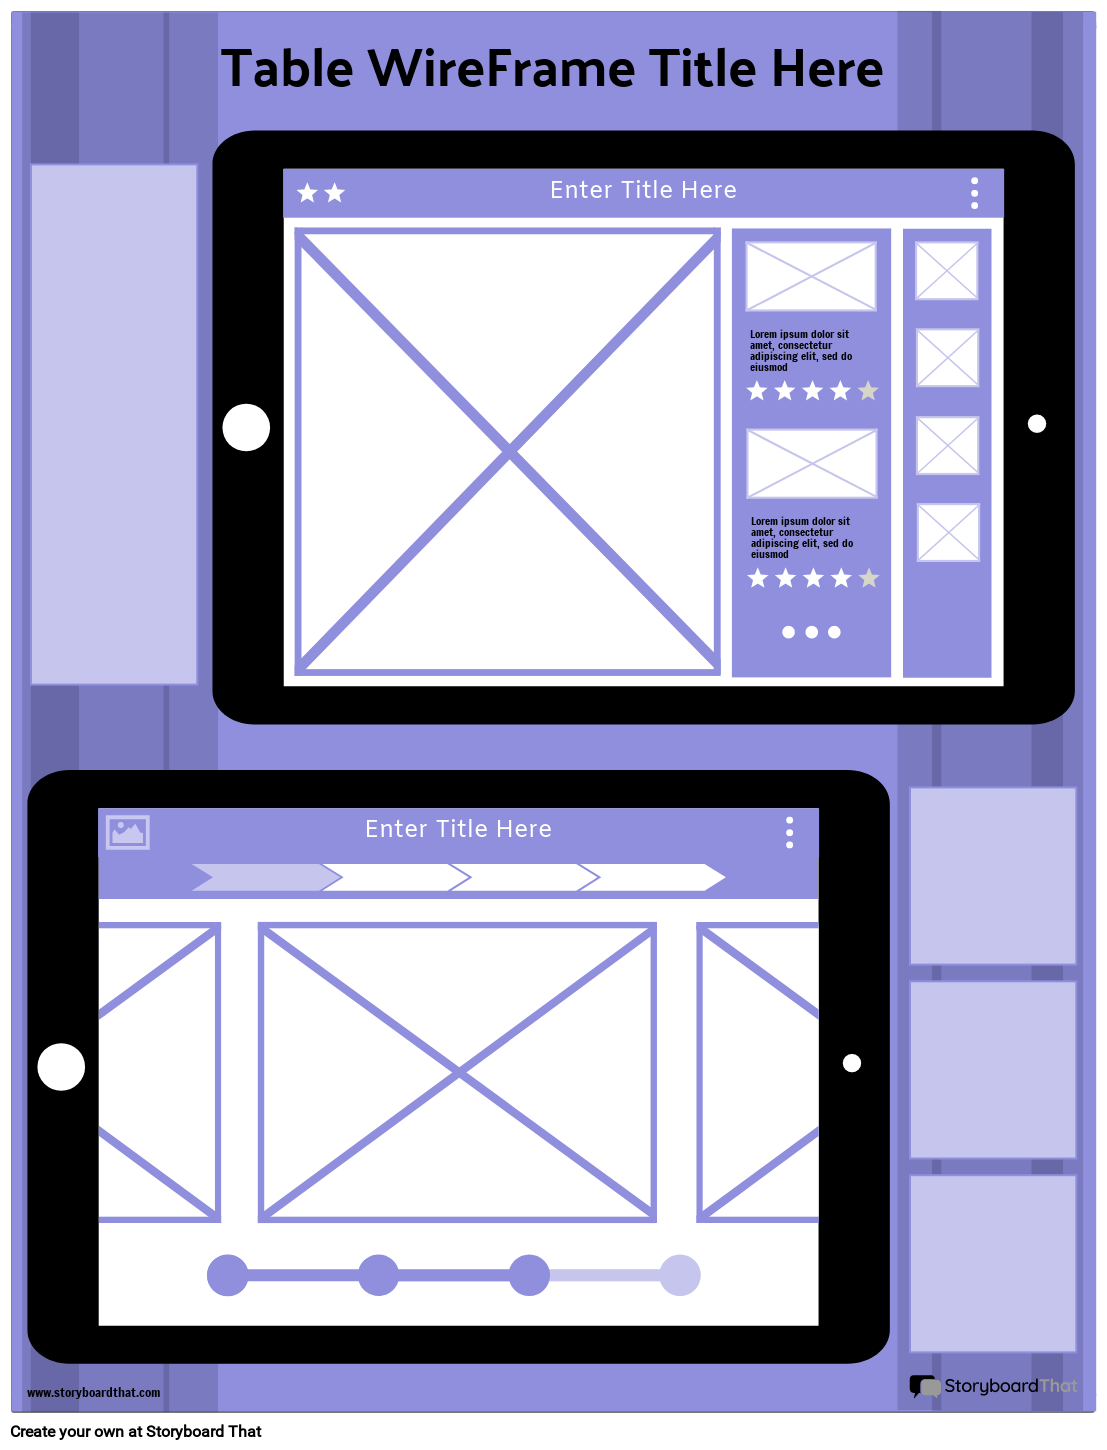 Corporate Tablet WireFrame Template 4